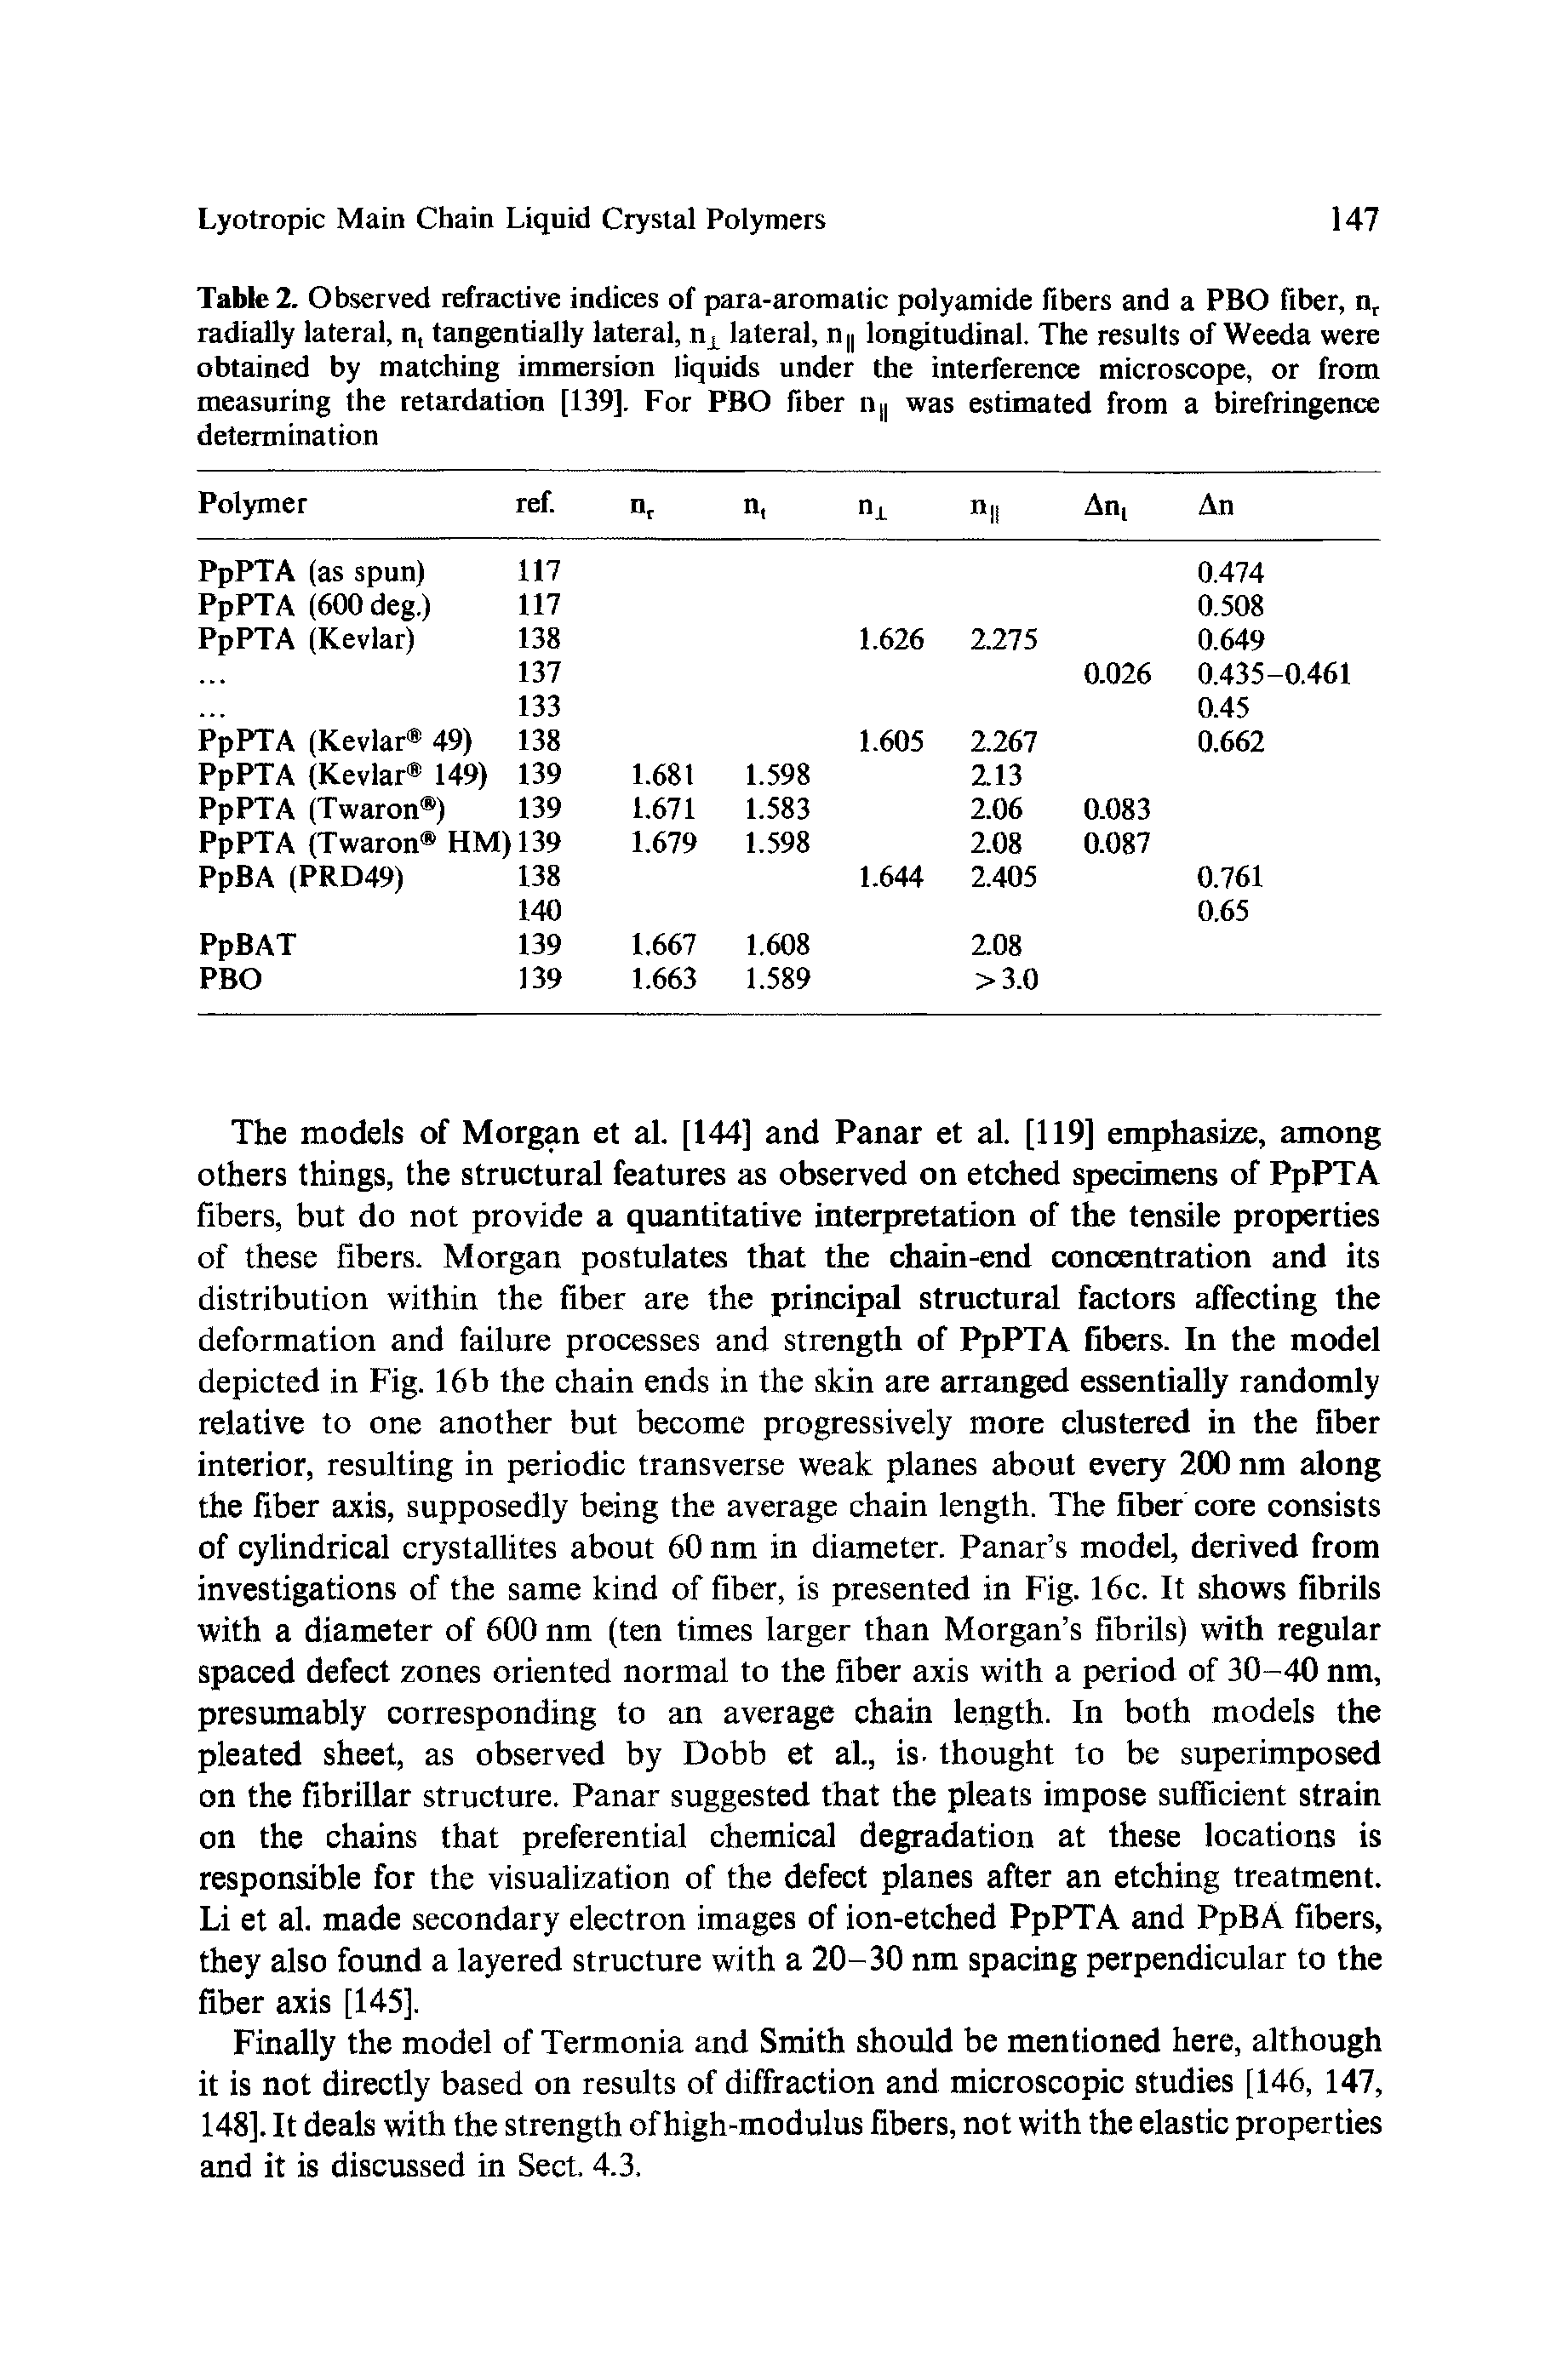 Table 2. Observed refractive indices of para-aromatic polyamide fibers and a PBO fiber, radially lateral, n, tangentially lateral, Hji lateral, n longitudinal. The results of Weeda were obtained by matching immersion liquids under the interference microscope, or from measuring the retardation [139]. For PBO fiber ii was estimated from a birefringence determination...